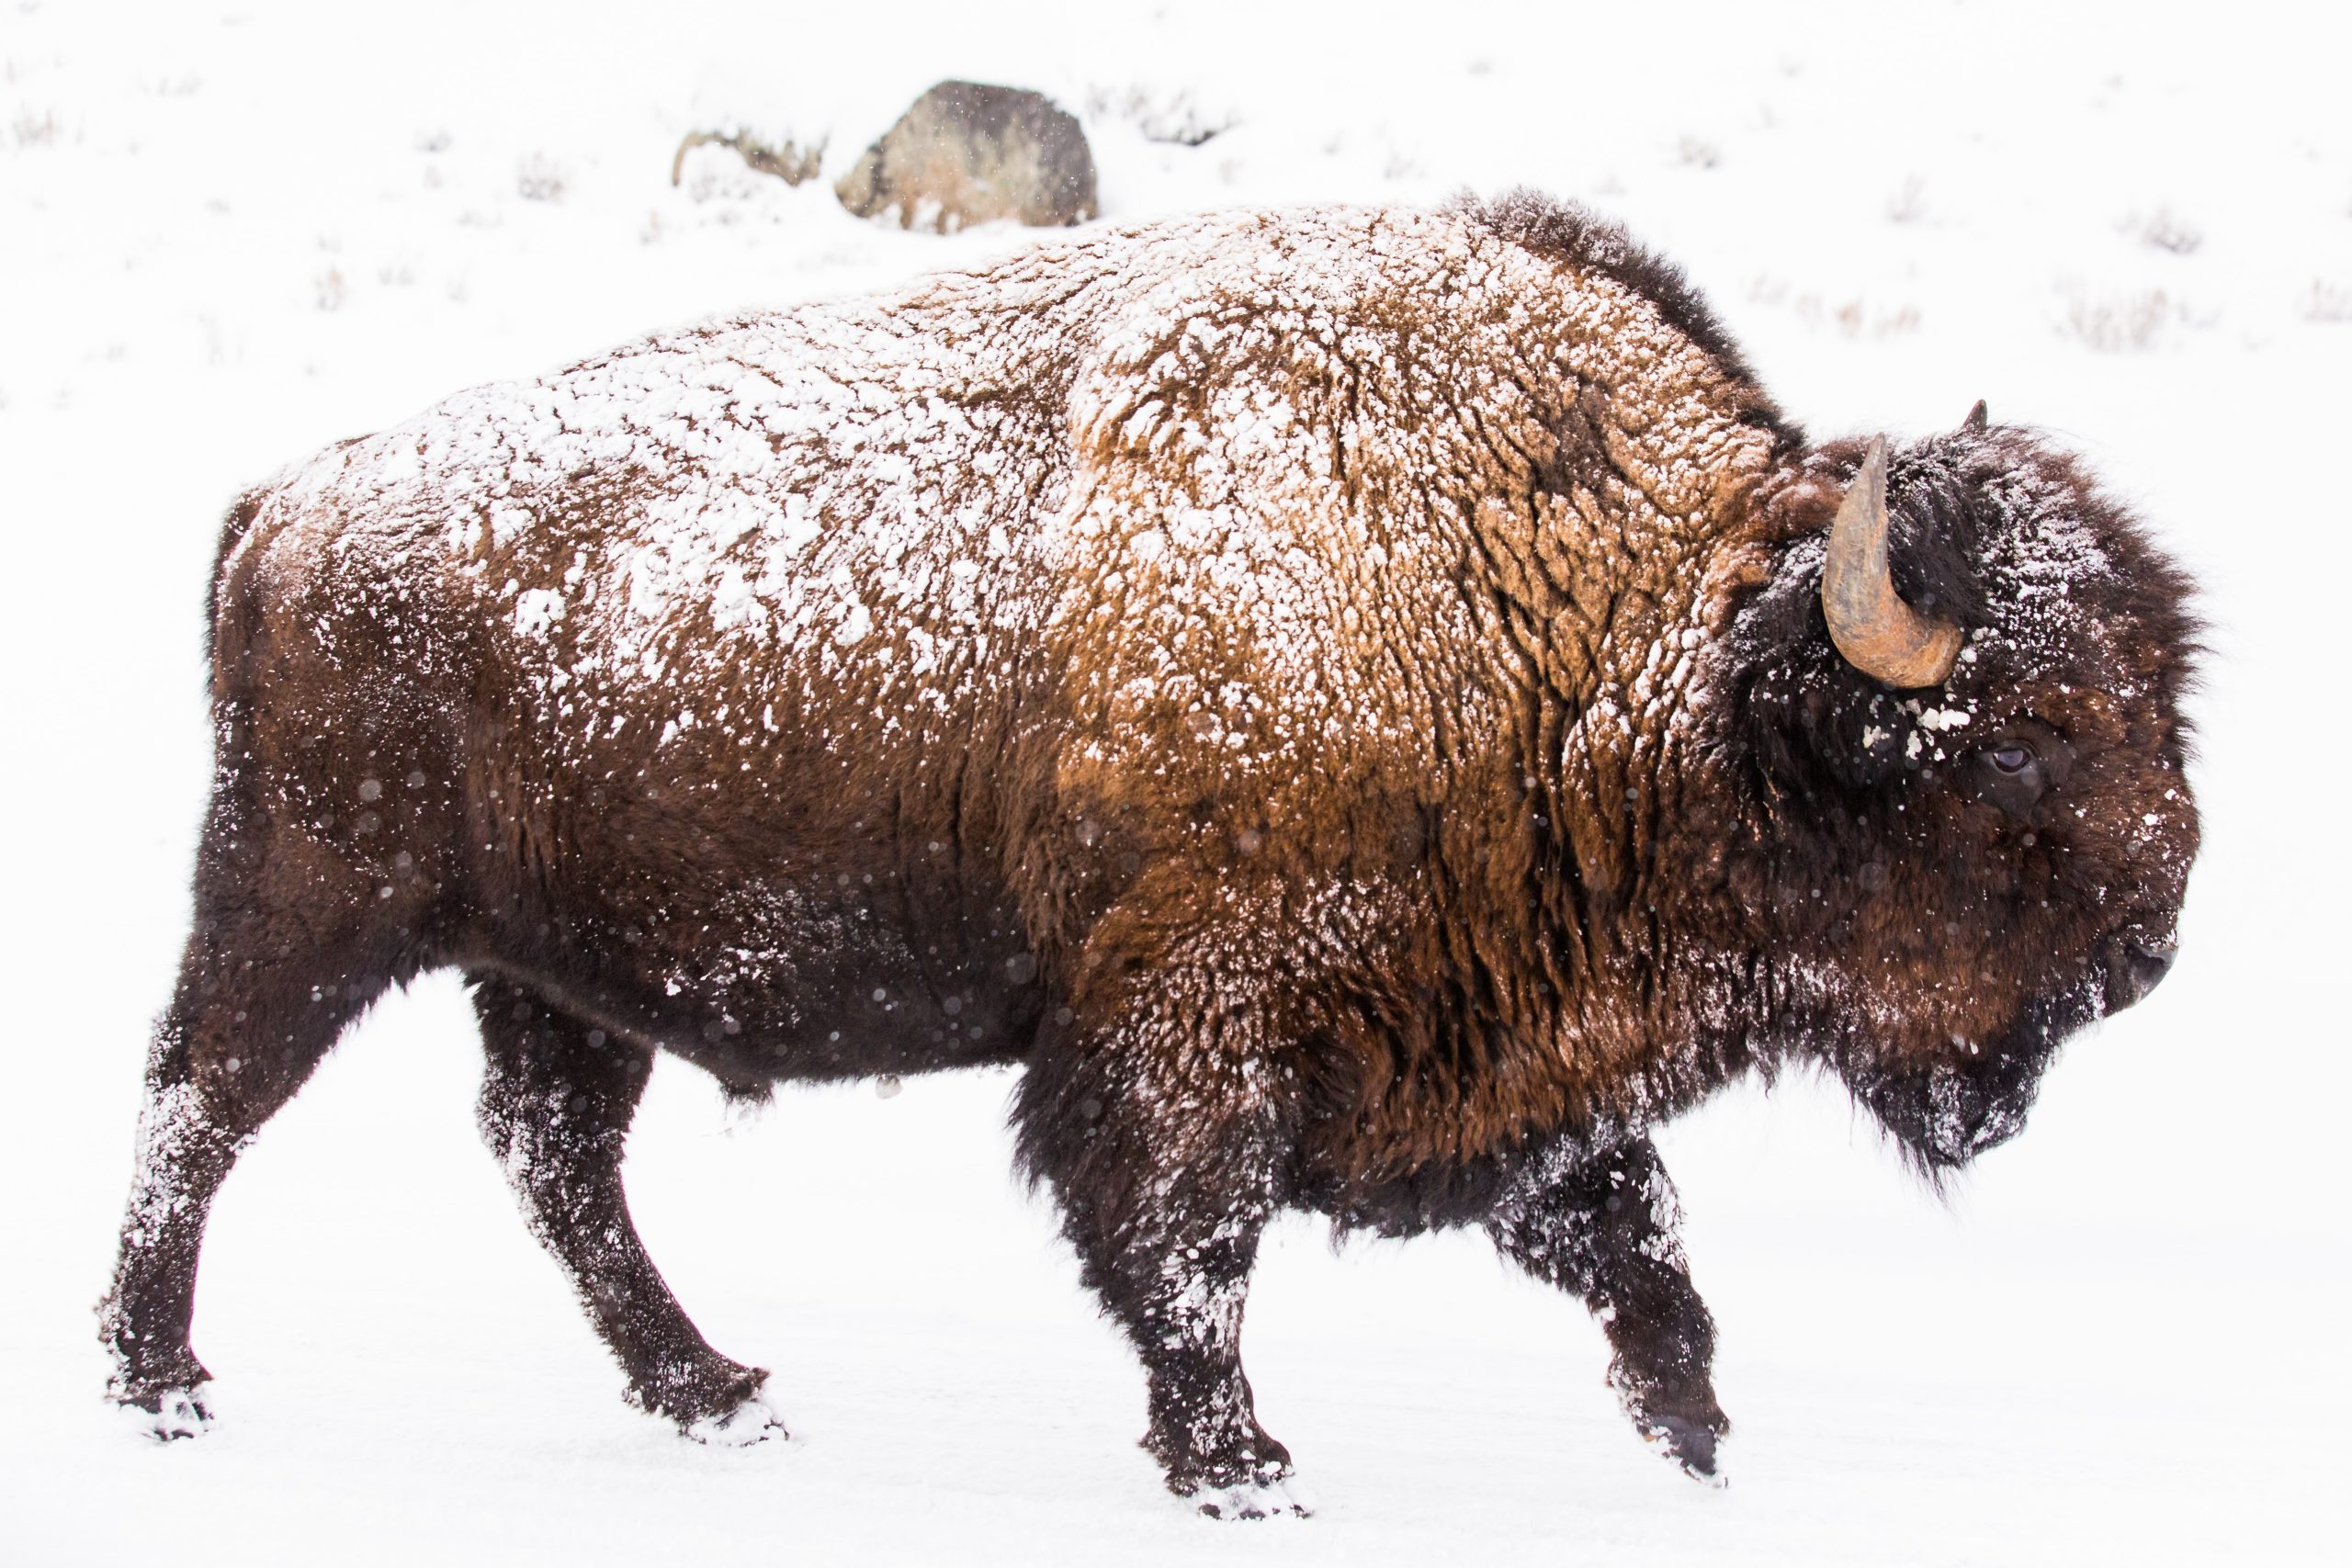 Bison in the snow, in profile, snow covered fur